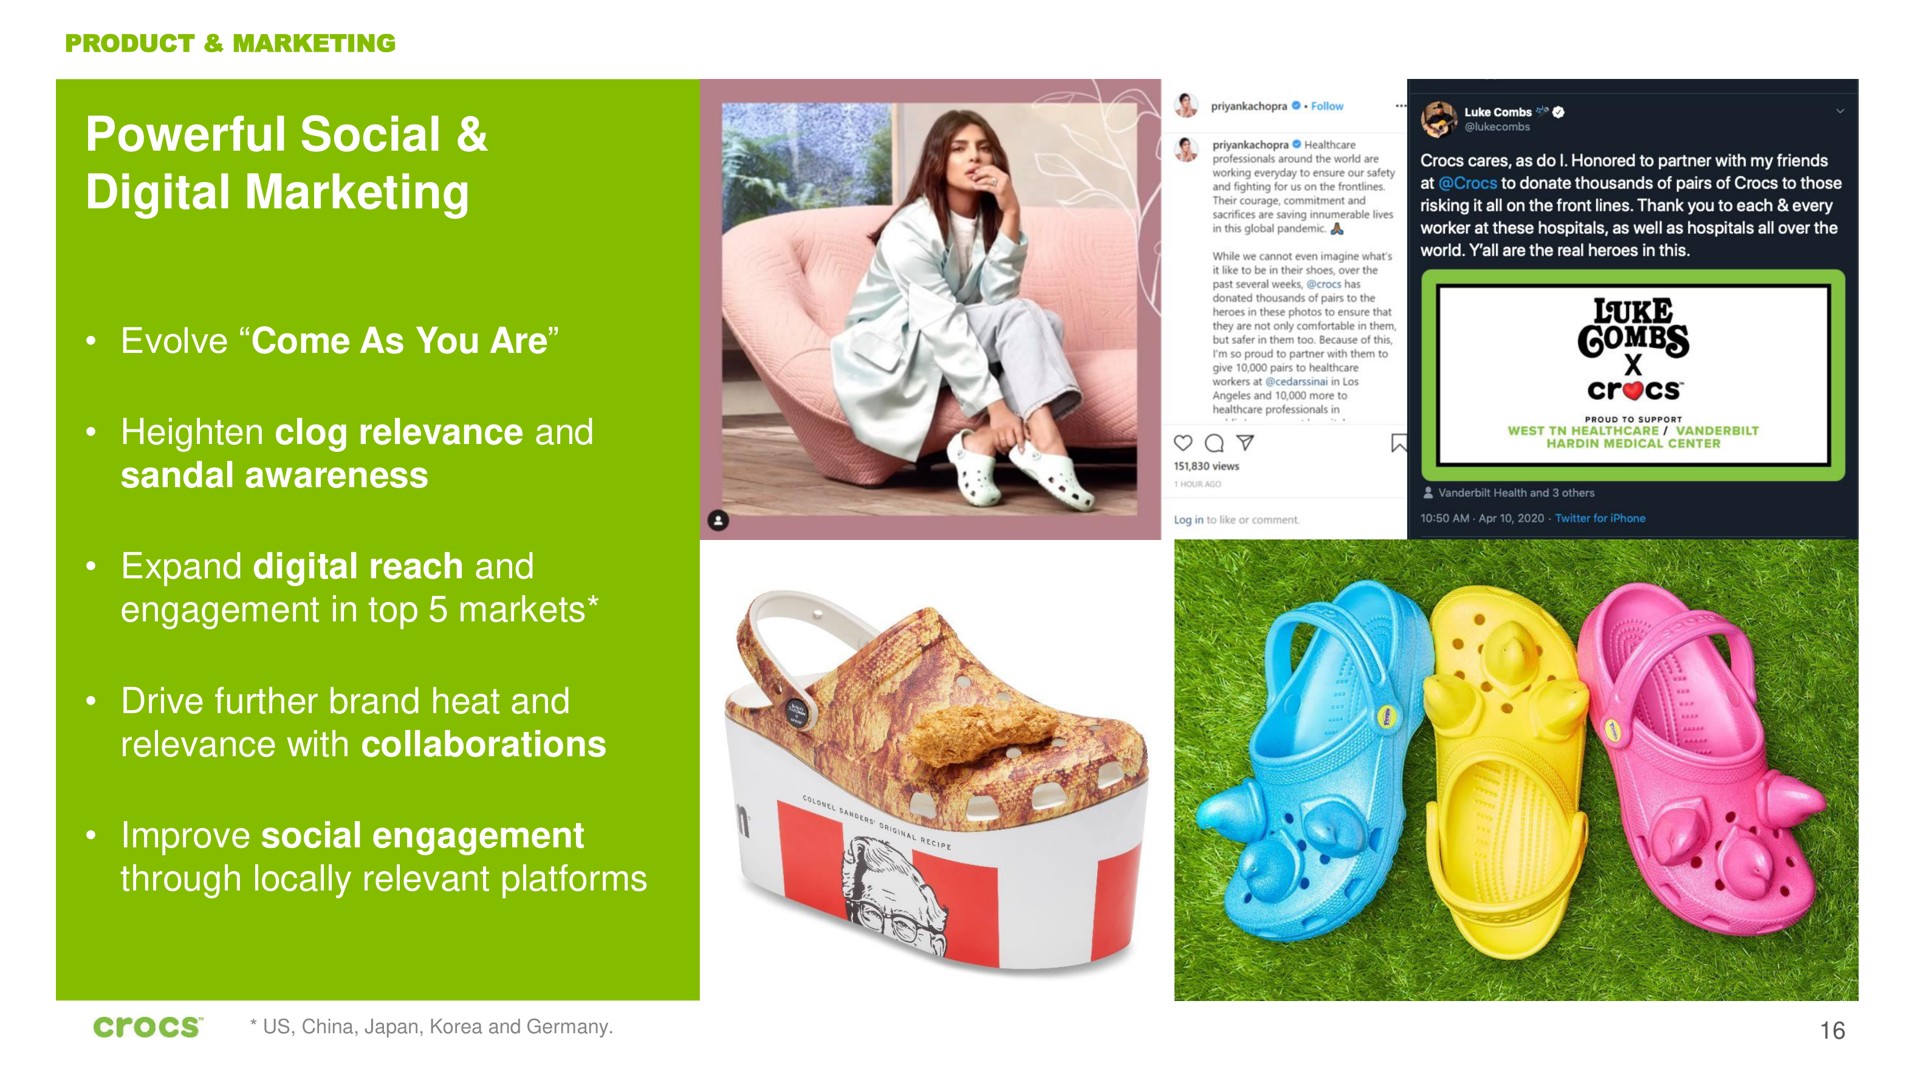 powerful social digital marketing a heighten clog relevance and late a cay luke west drive further brand heat and relevance with collaborations expand reach and engagement in top markets improve engagement through locally relevant platforms | Crocs